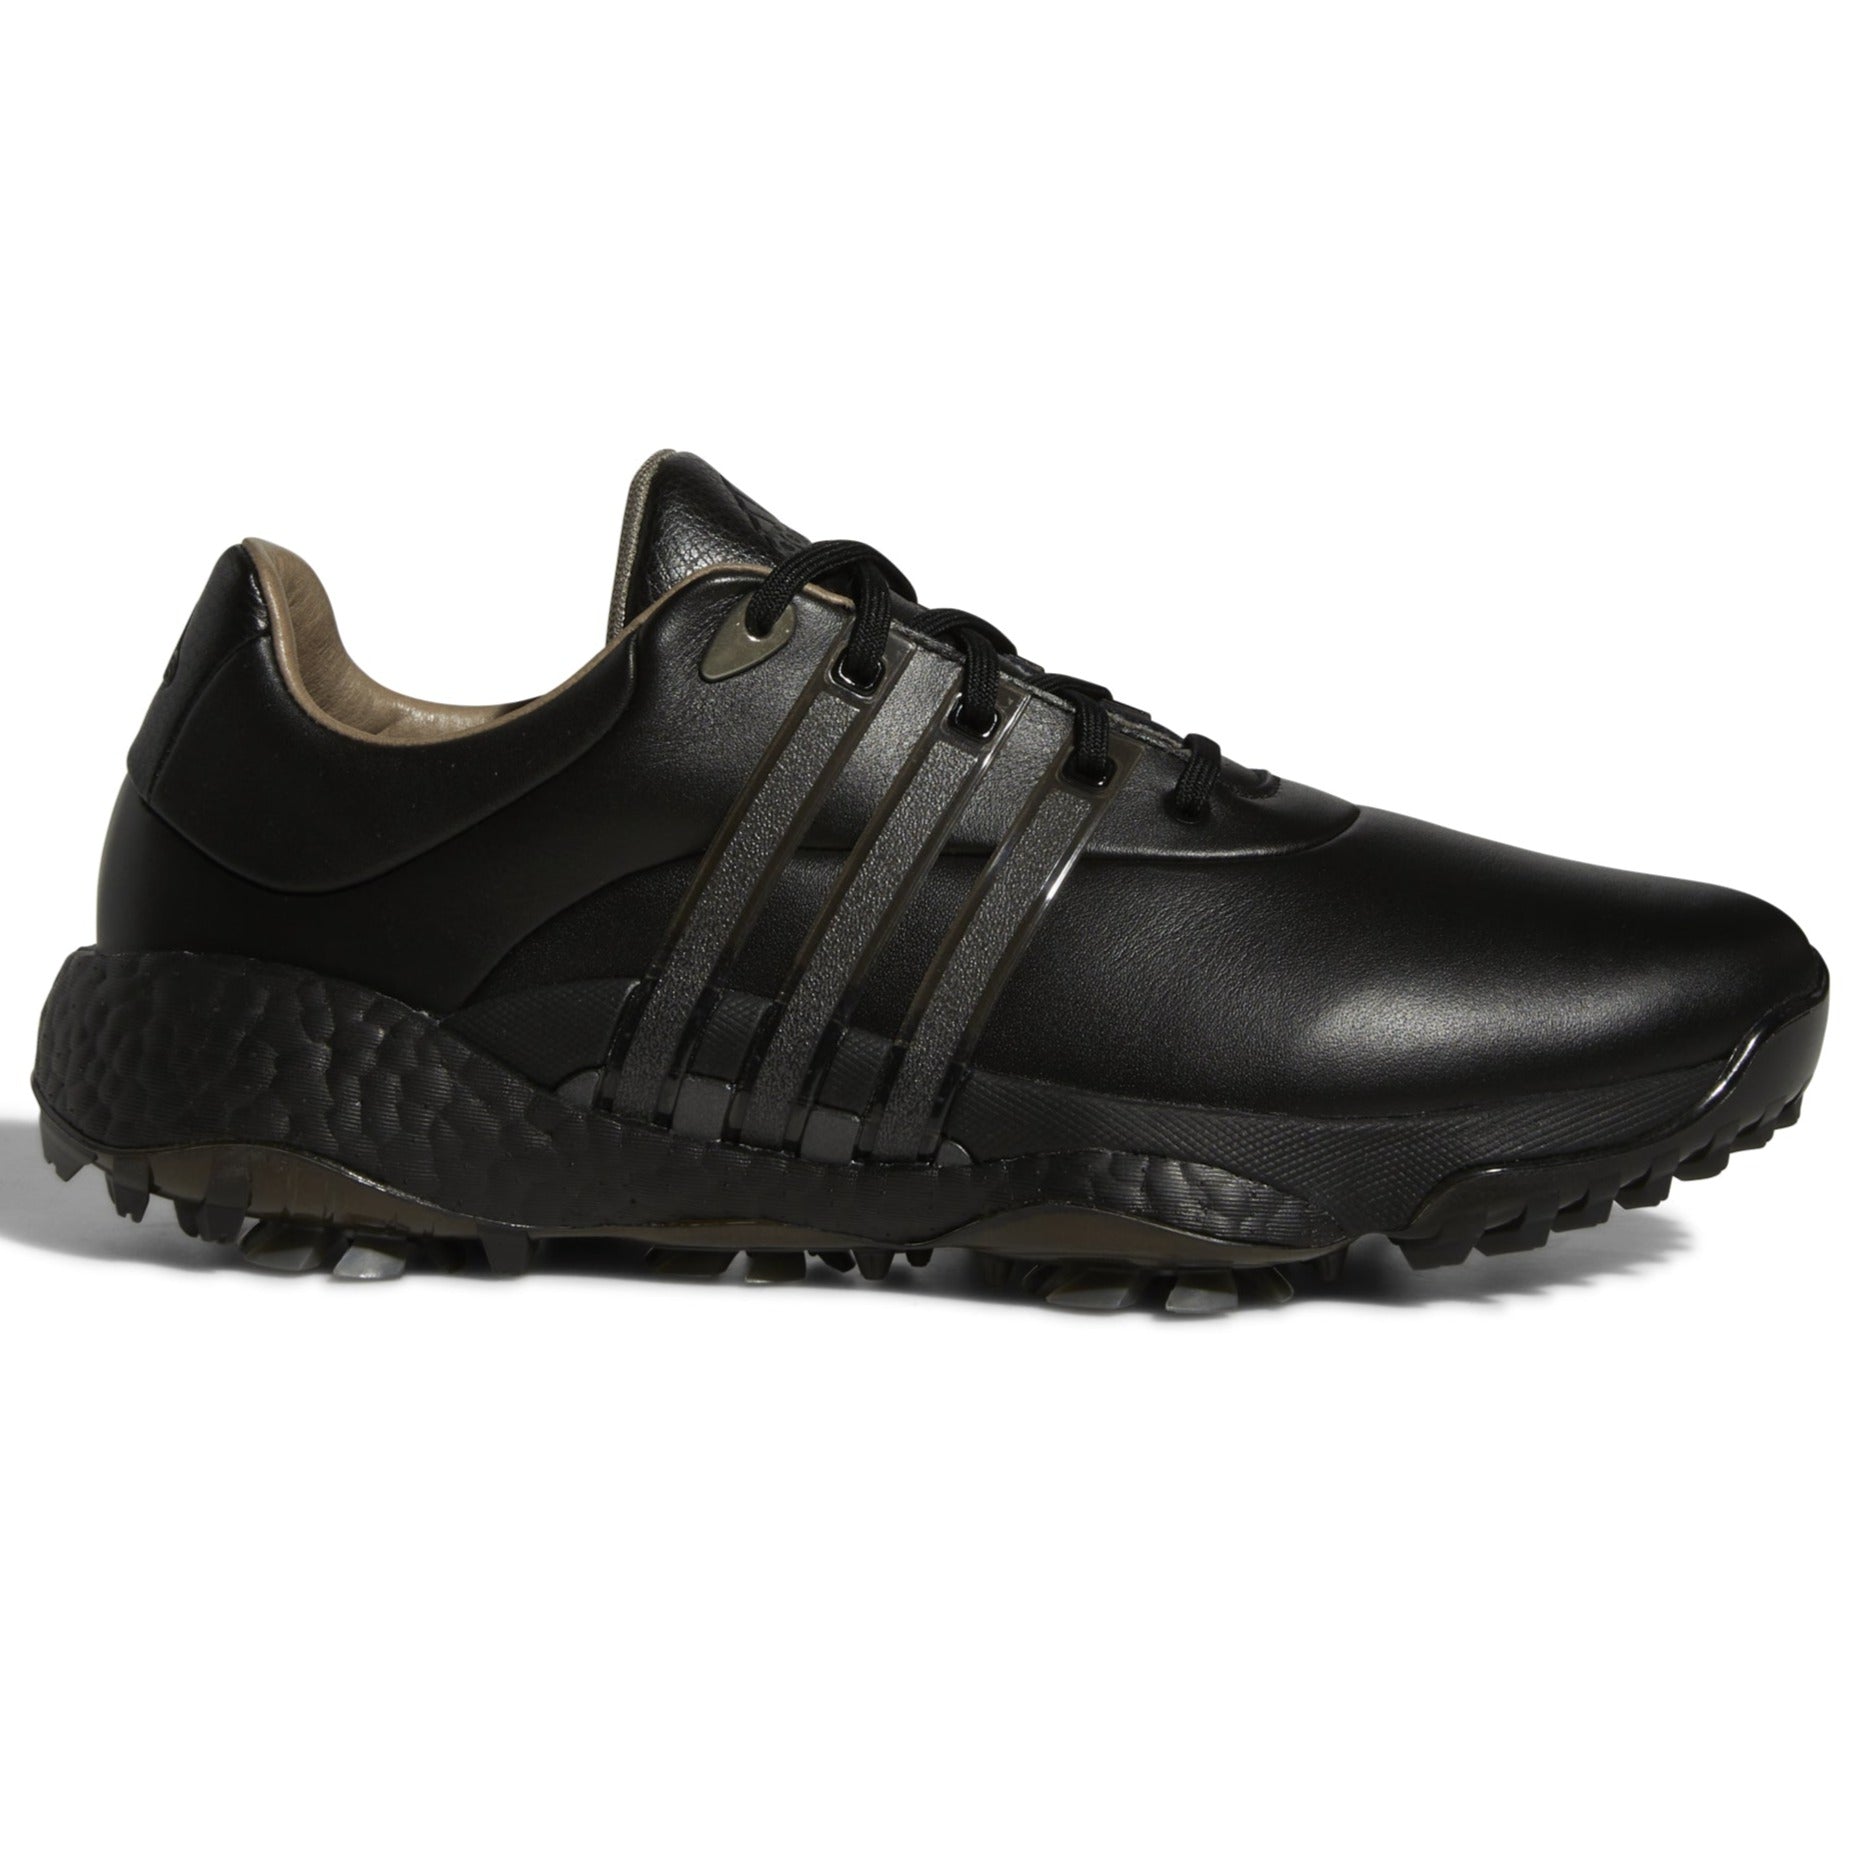 adidas Tour360 22 Golf Shoes GY4544